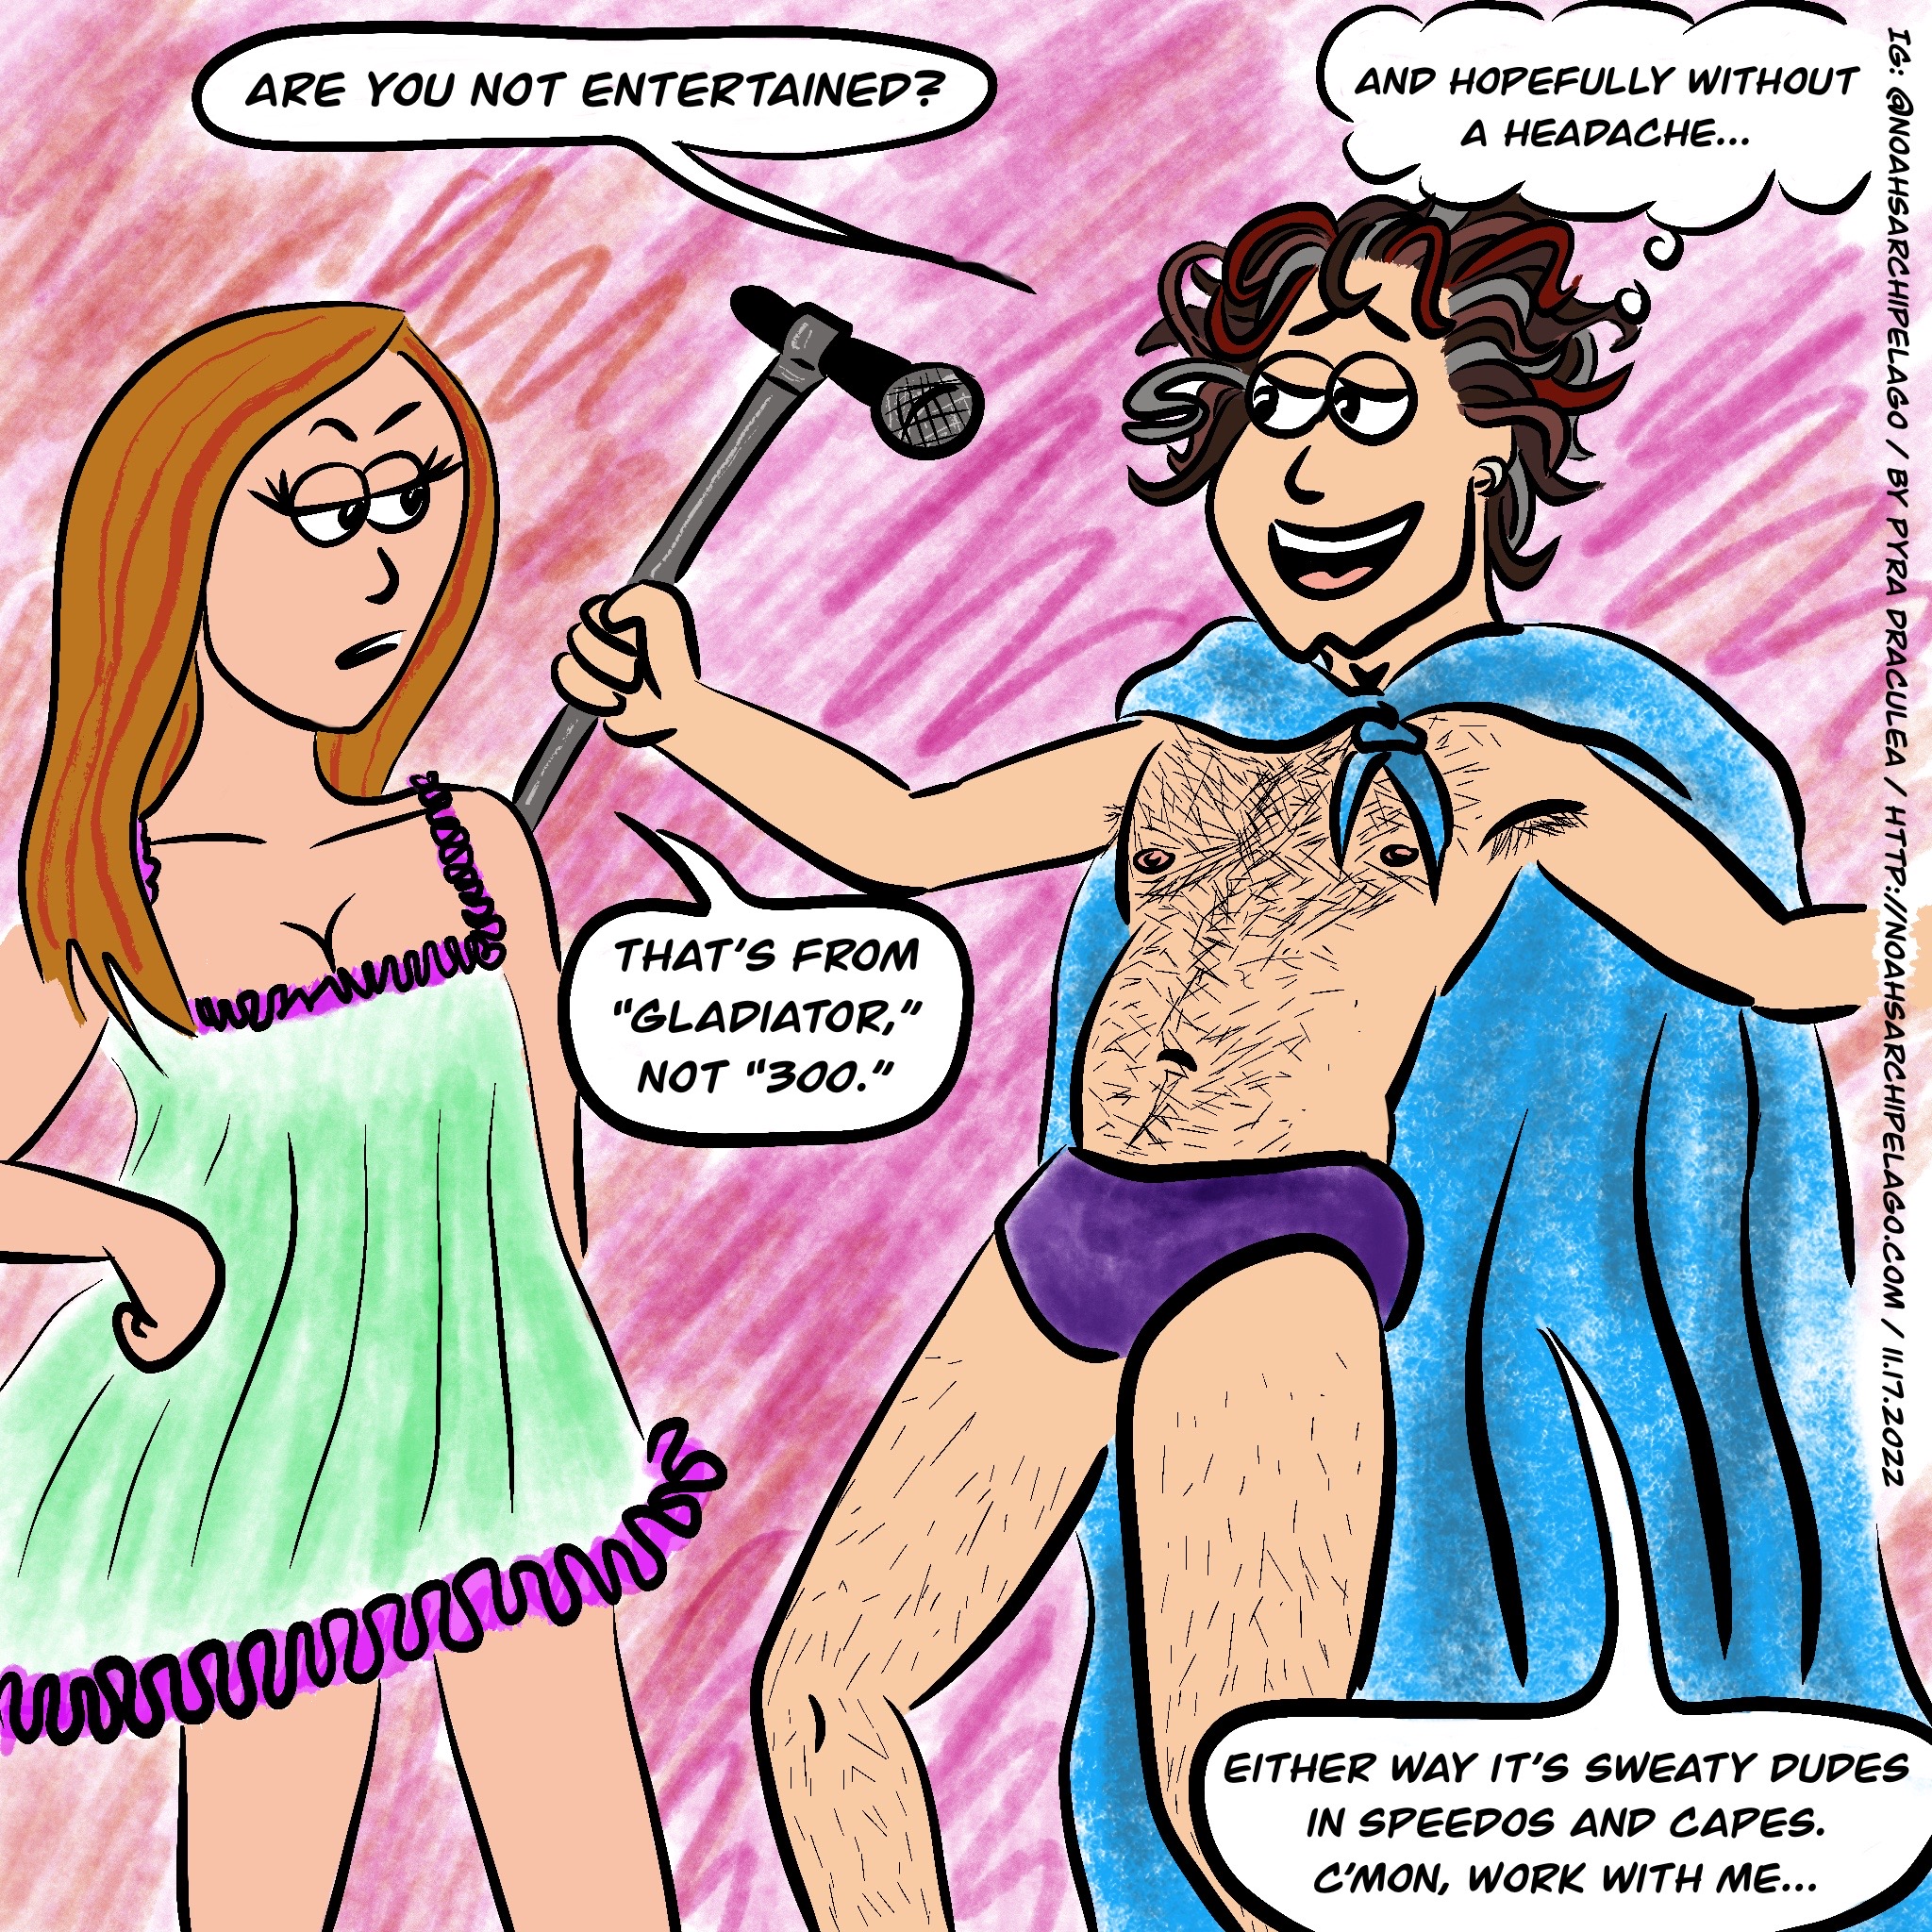 Noah, wearing purple Speedos and with a blue towel tied around his shoulders like a cape, holds his mic stand and stands in a wide open gladiatorial stance. He looks at Ruth, smiling, and says, "Are you not entertained?" and then thinks "and hopefully without a headache..." Ruth, in her nightie, is unimpressed and replies, "That's from 'Gladiator,' not '300.'" Noah answers, "Either way it's sweaty dudes in Speedos and capes. C'mon, work with me..."